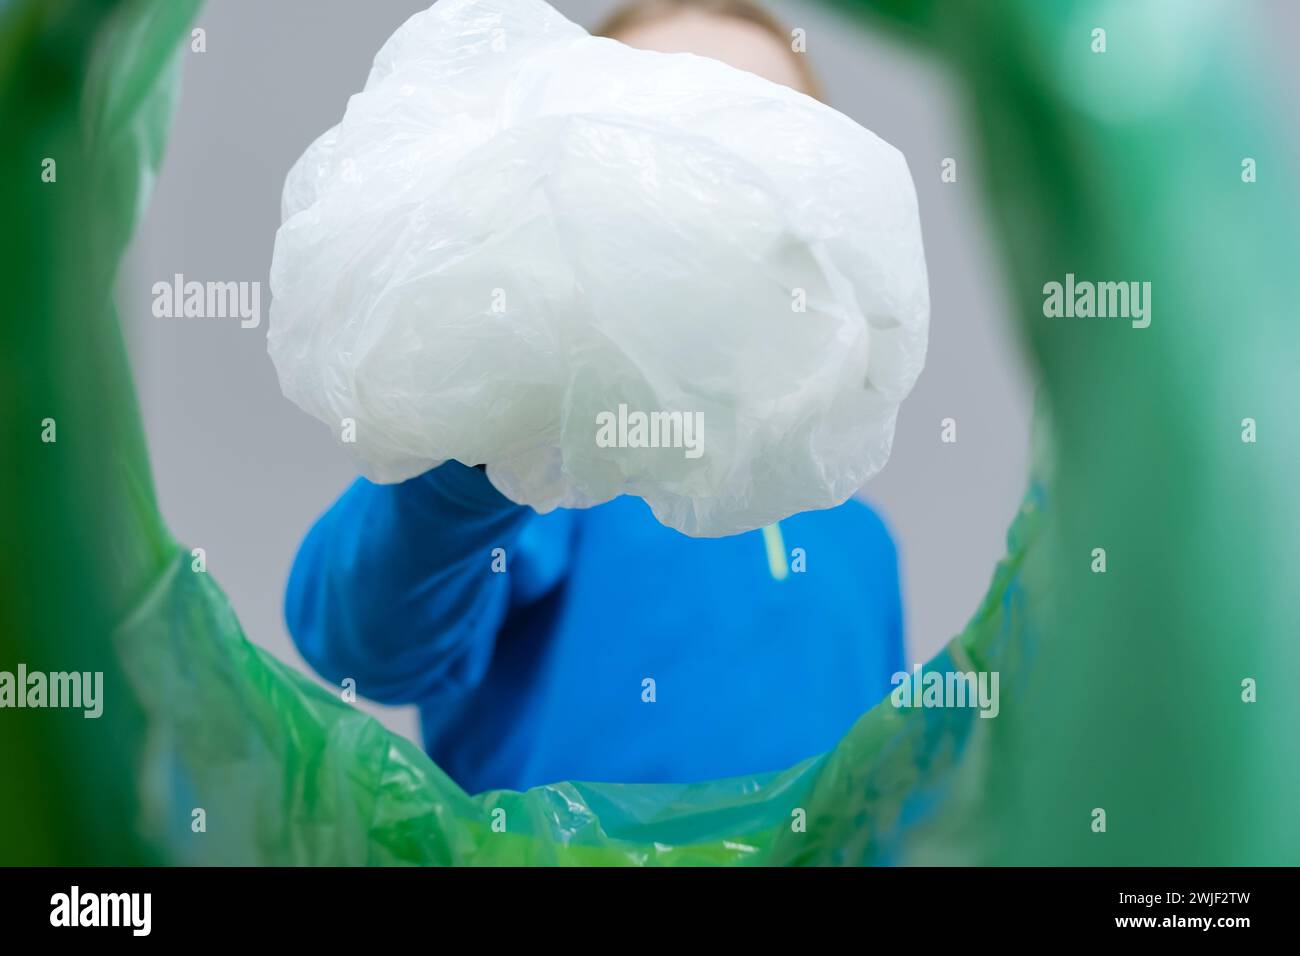 Low angle view child roll up plastic wrap in a trash bin, recycling and waste sorting concept Stock Photo